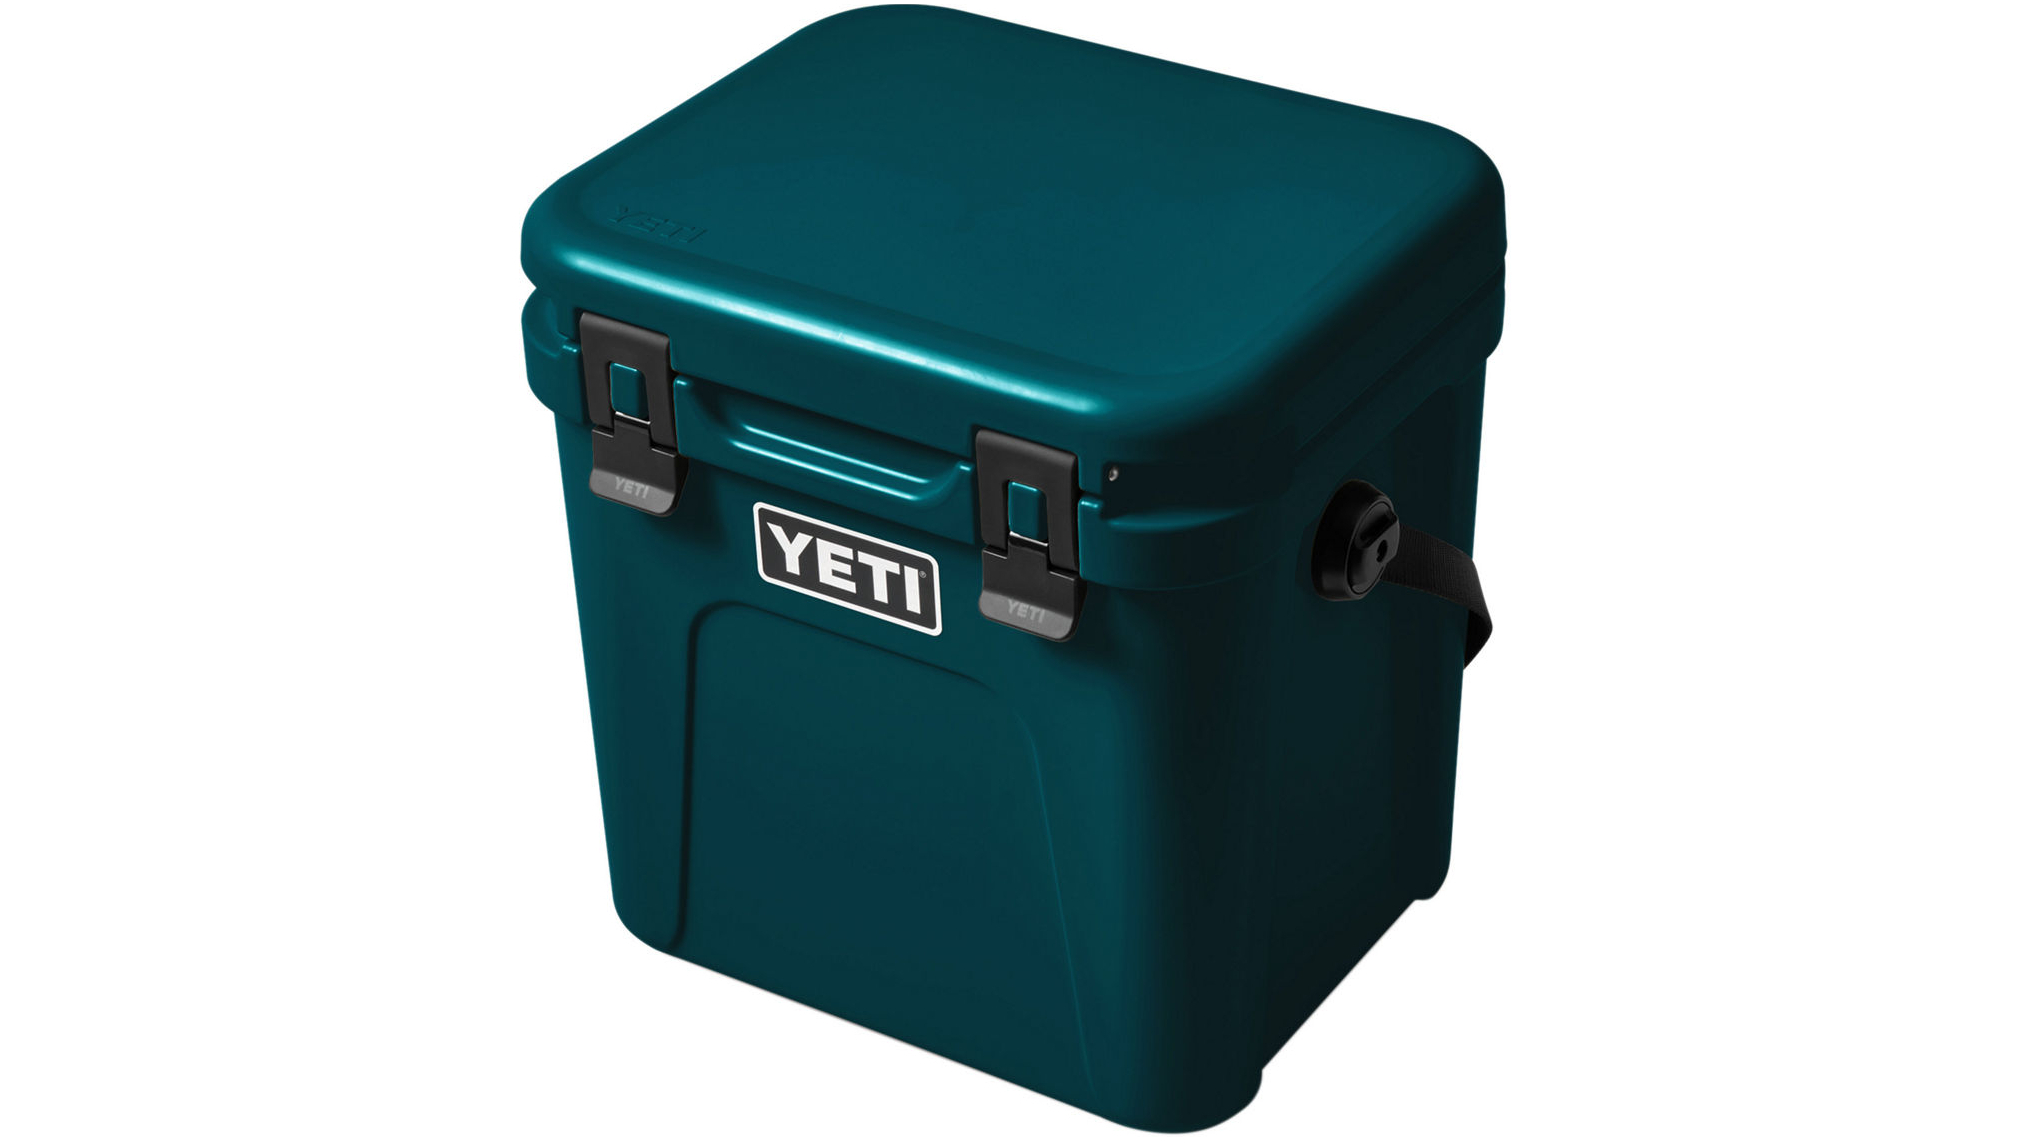 Yeti cooler in Agave Teal